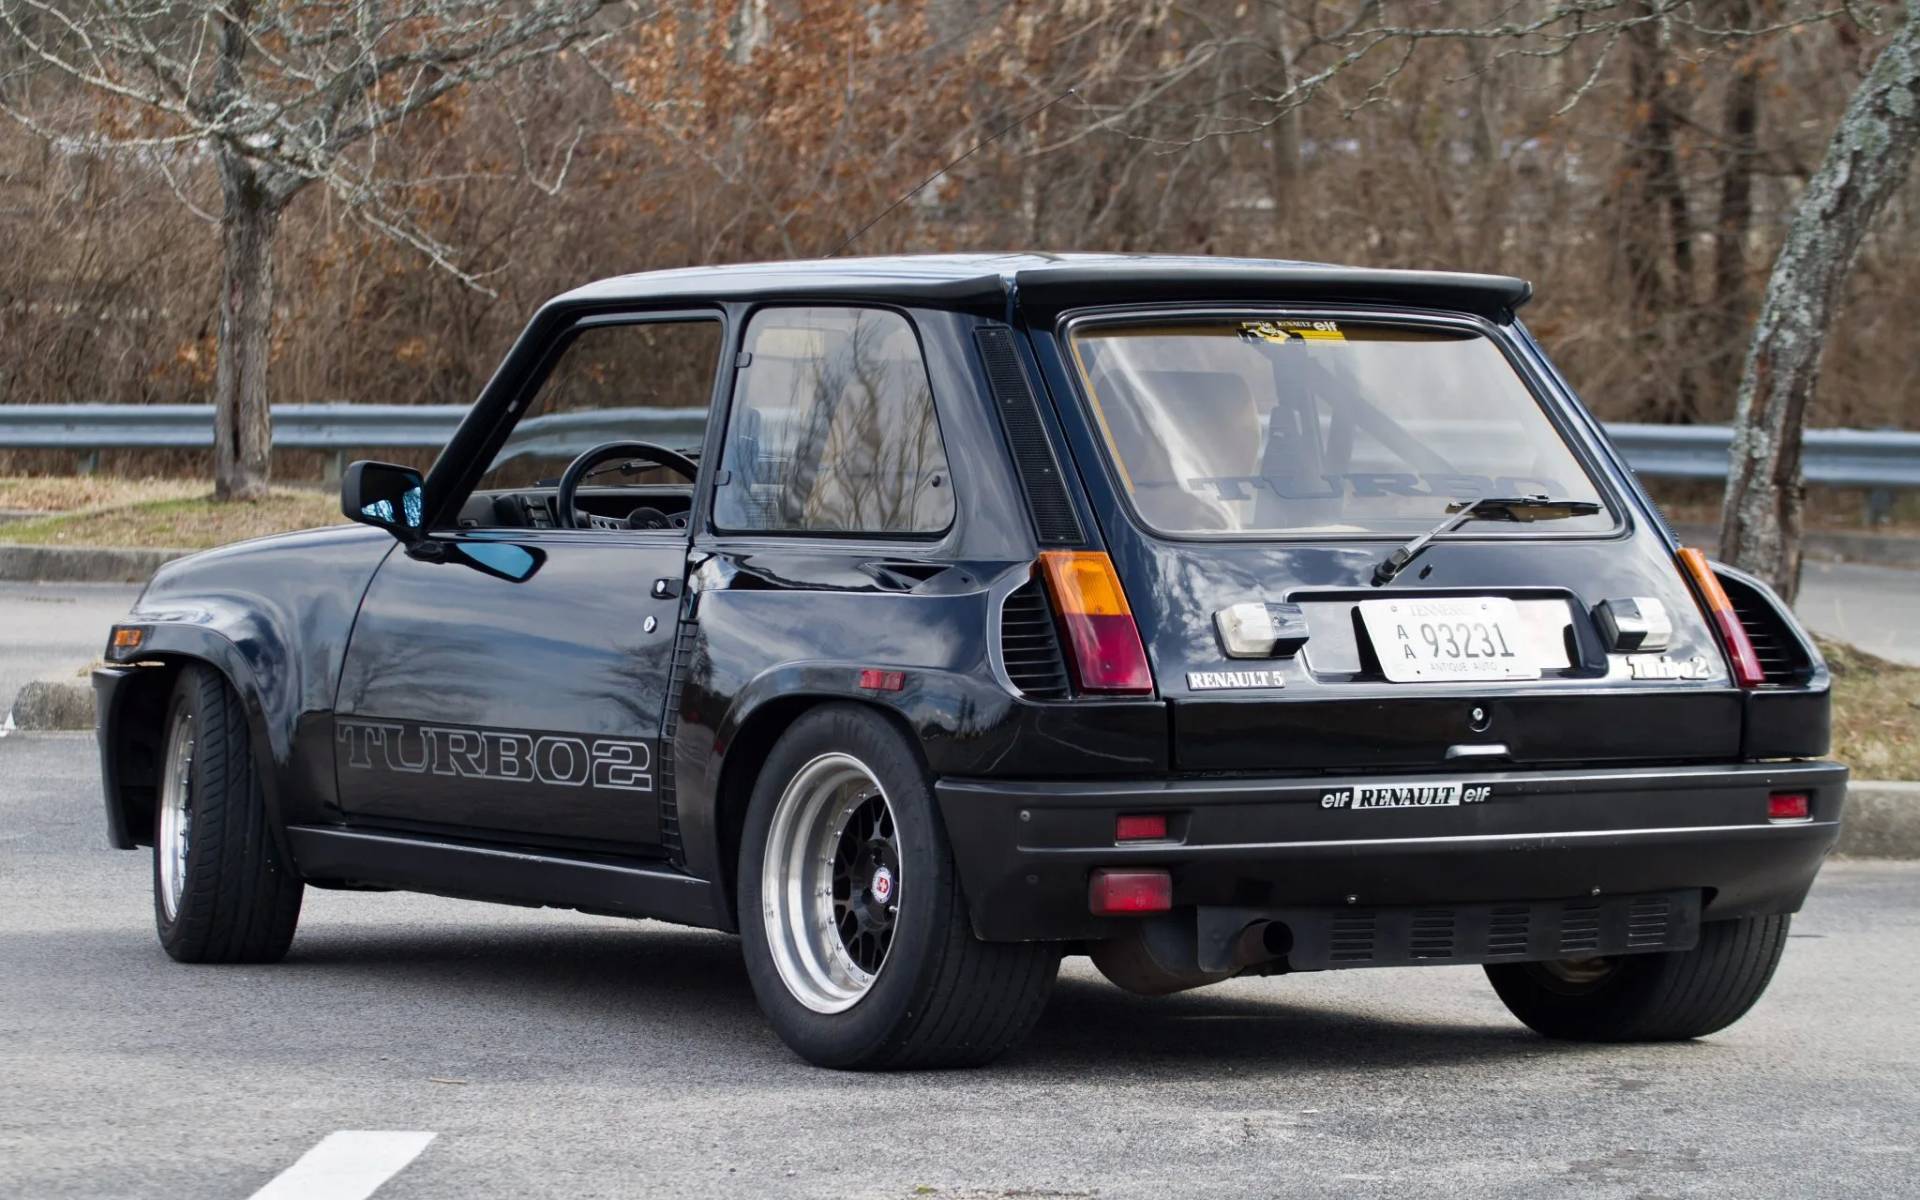 Renault 5 Turbo 2 Sells for 160,000 USD on Bring a Trailer - The